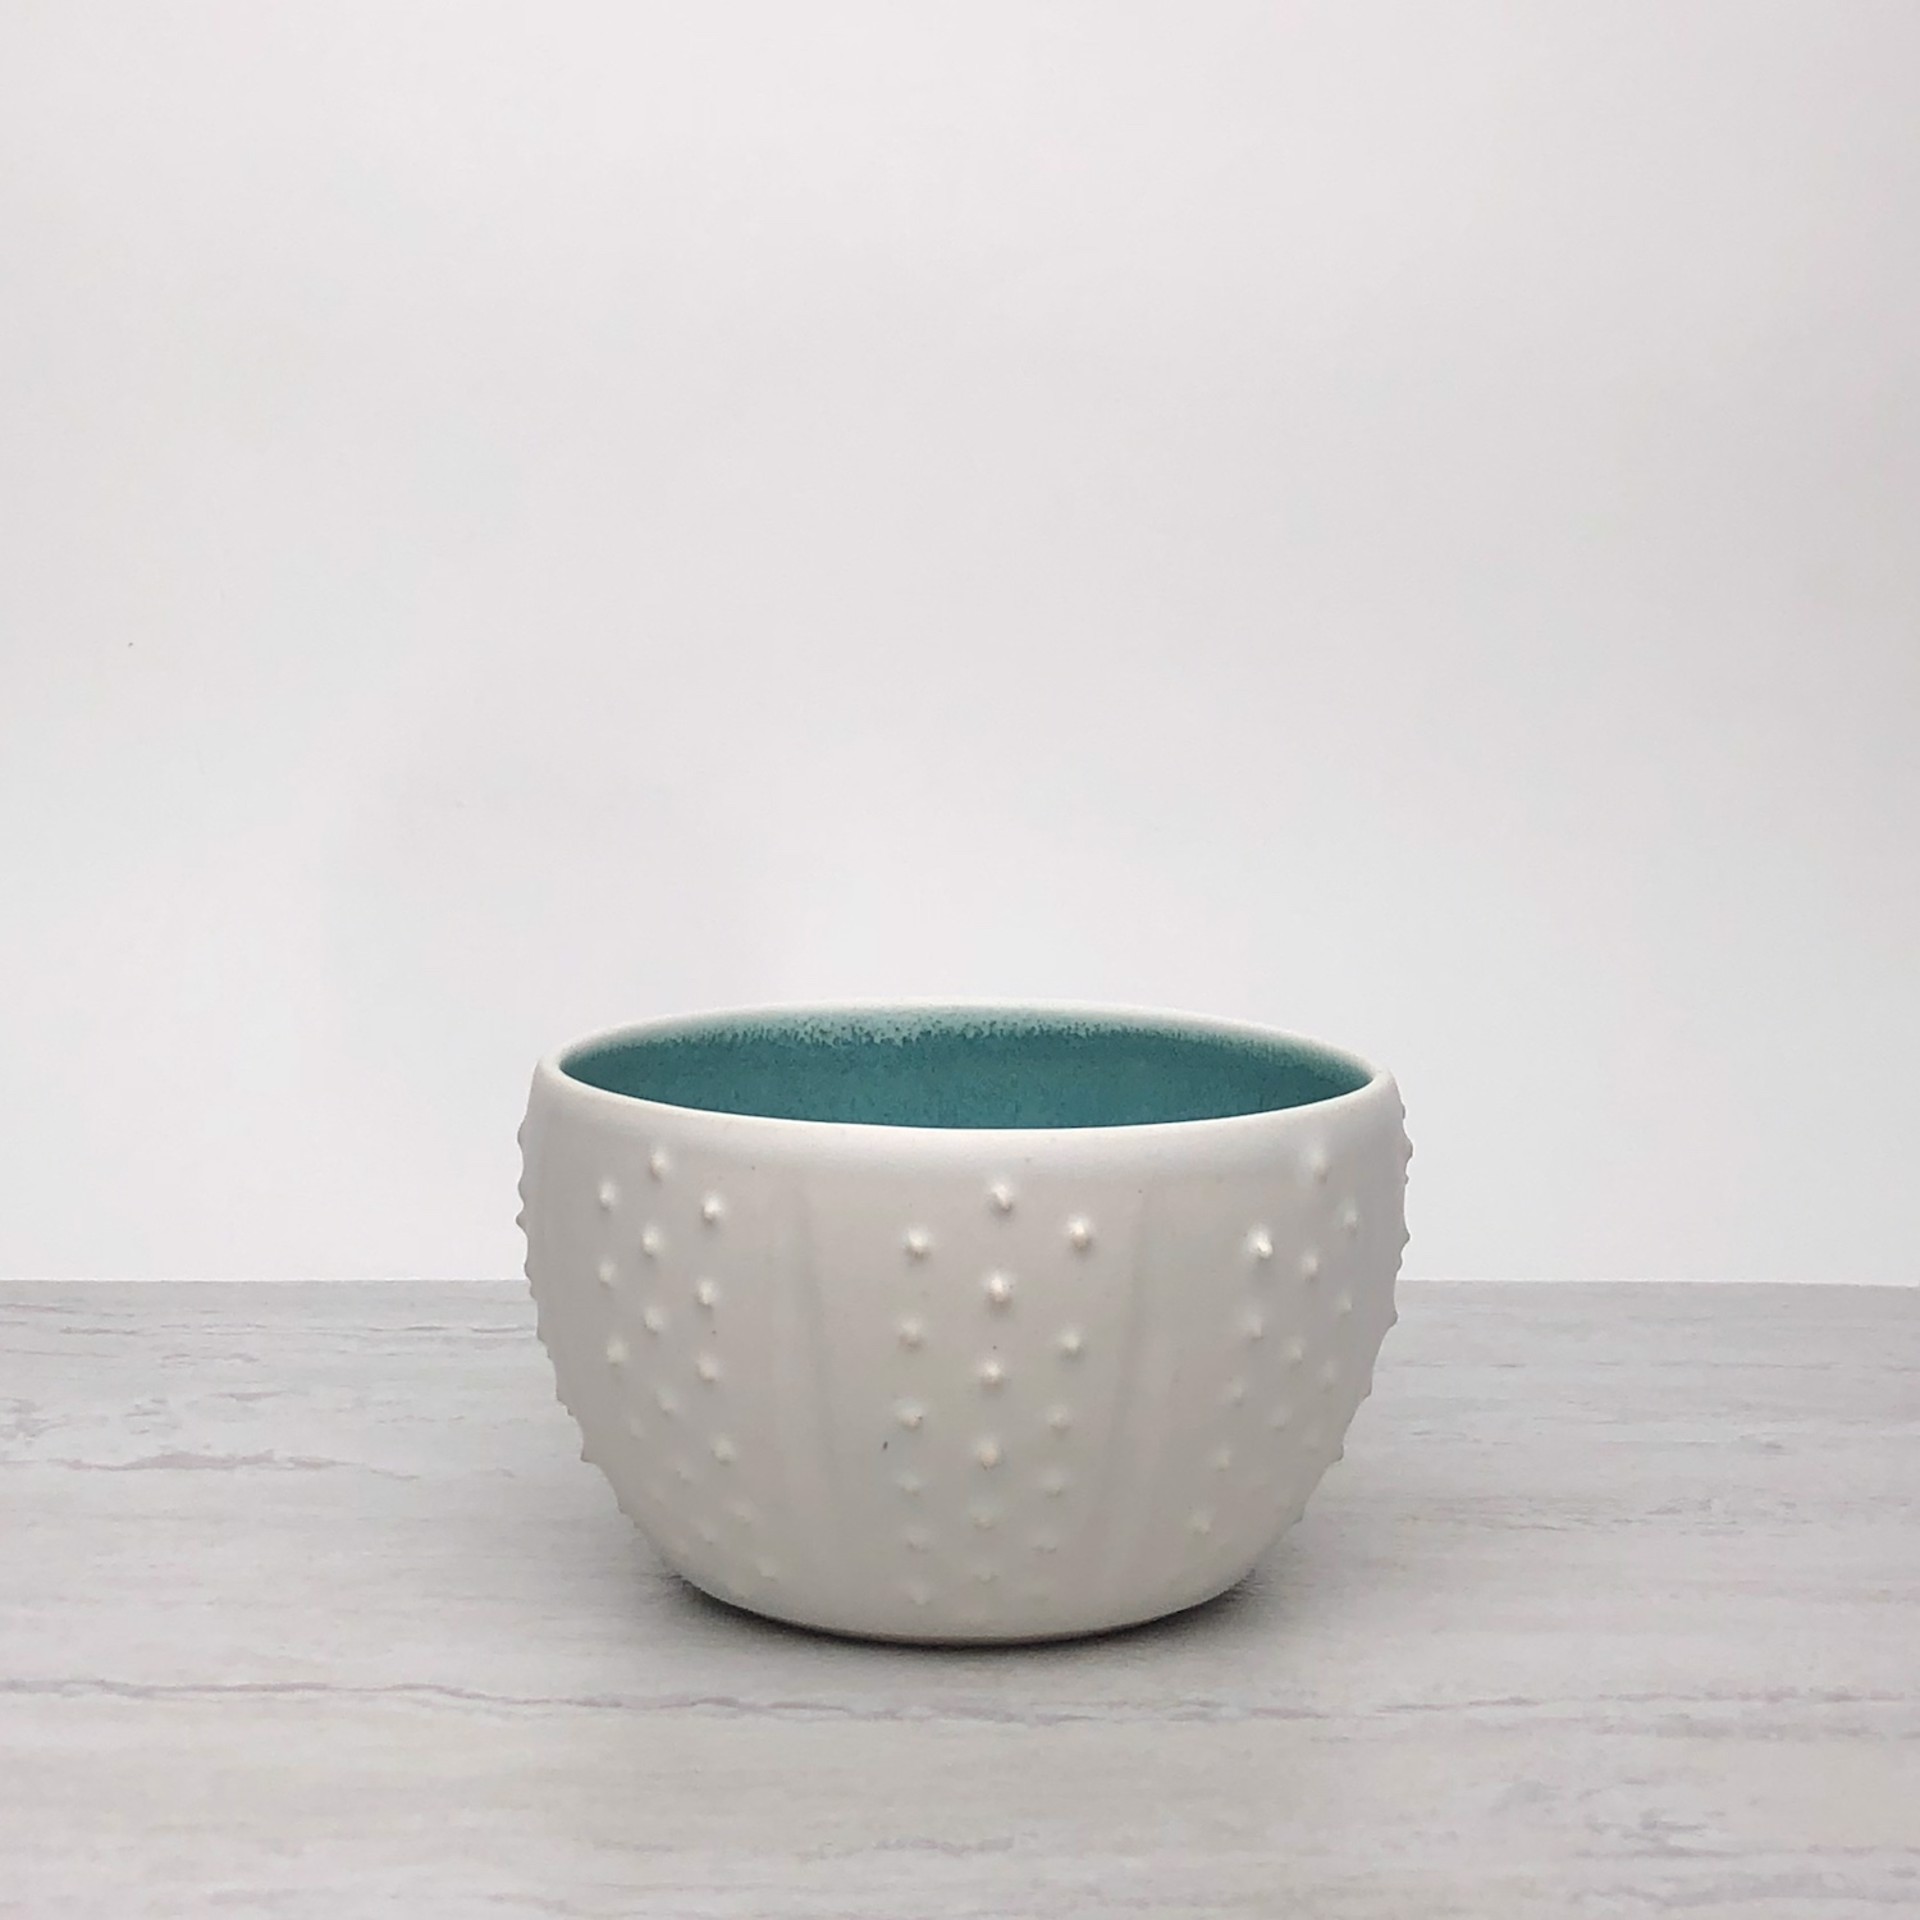 #23 urchin cereal bowl by Leah Streetman